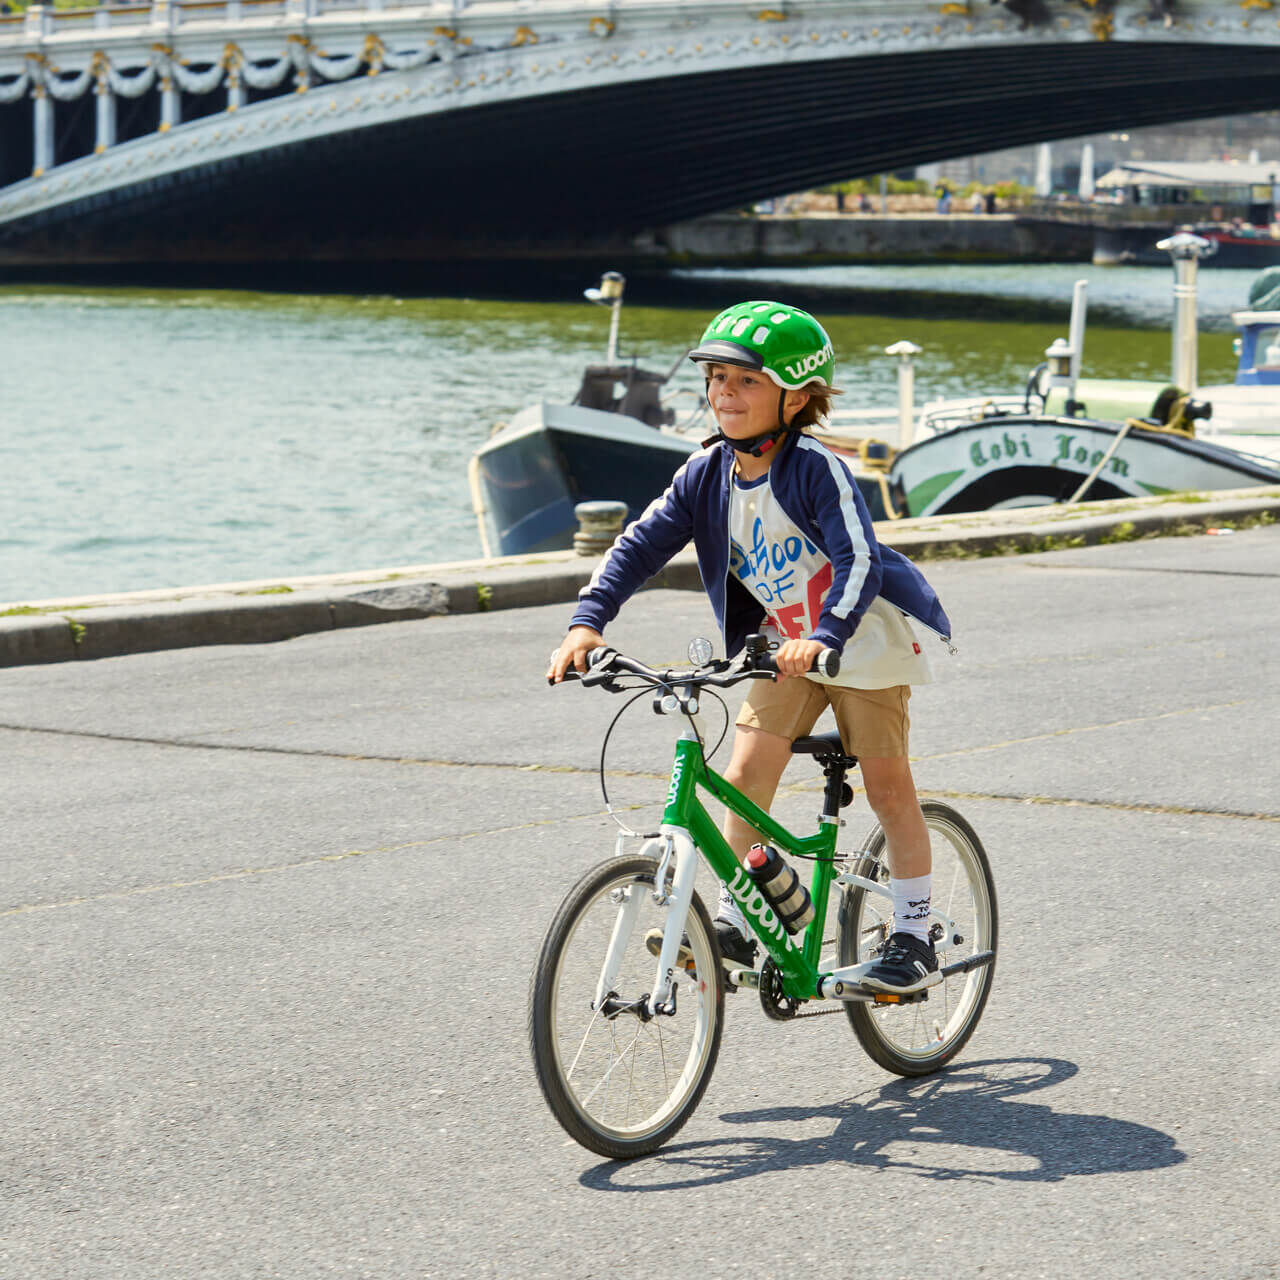 Child standing up on pedals on woom bike